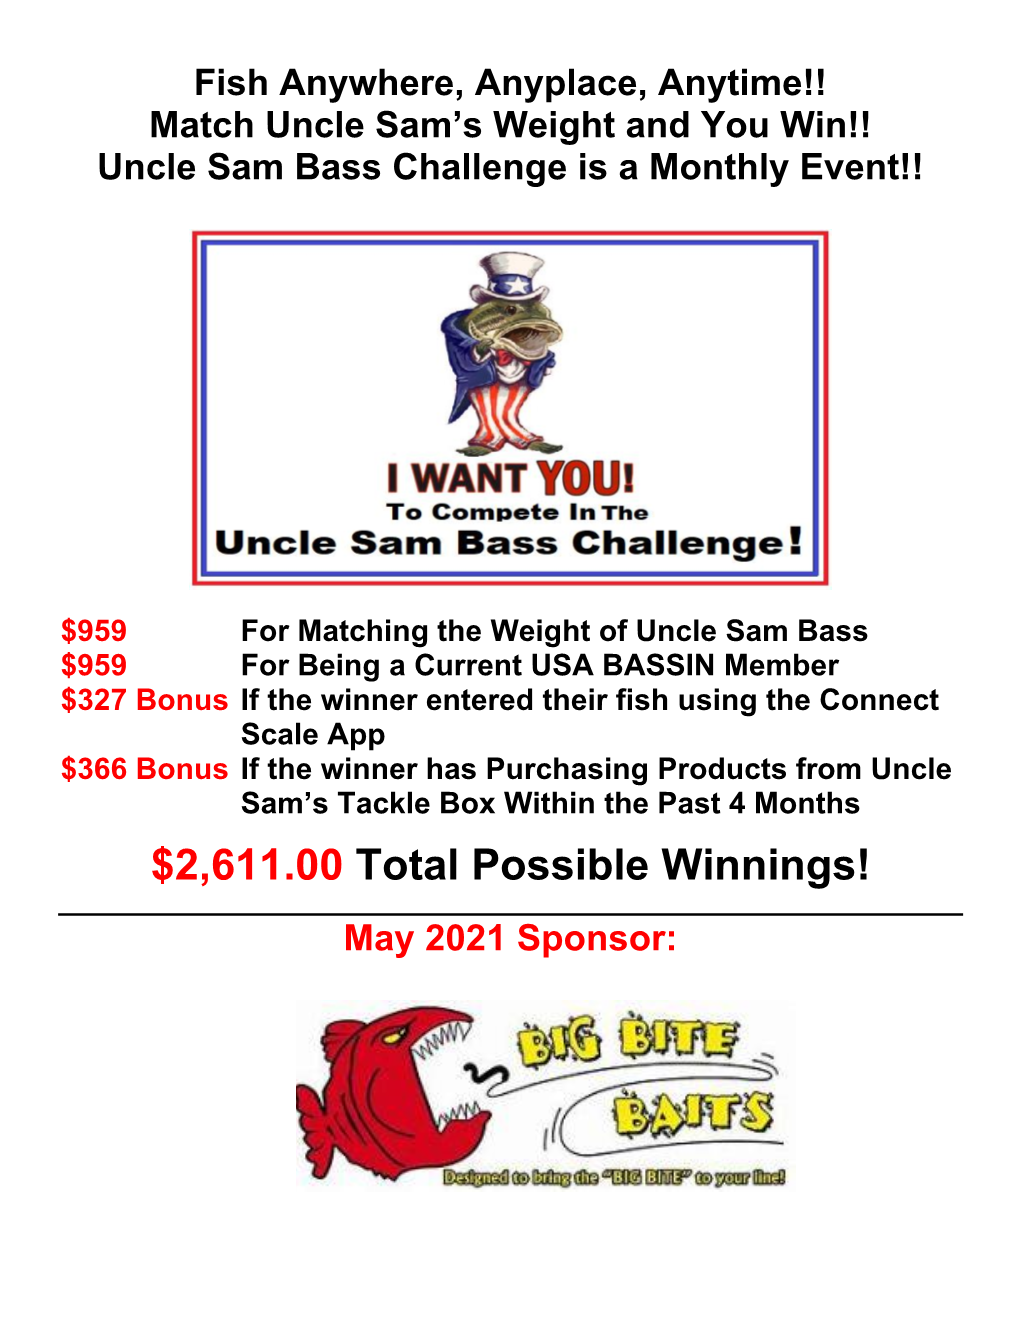 Uncle Sam Bass Challenge Rules 1